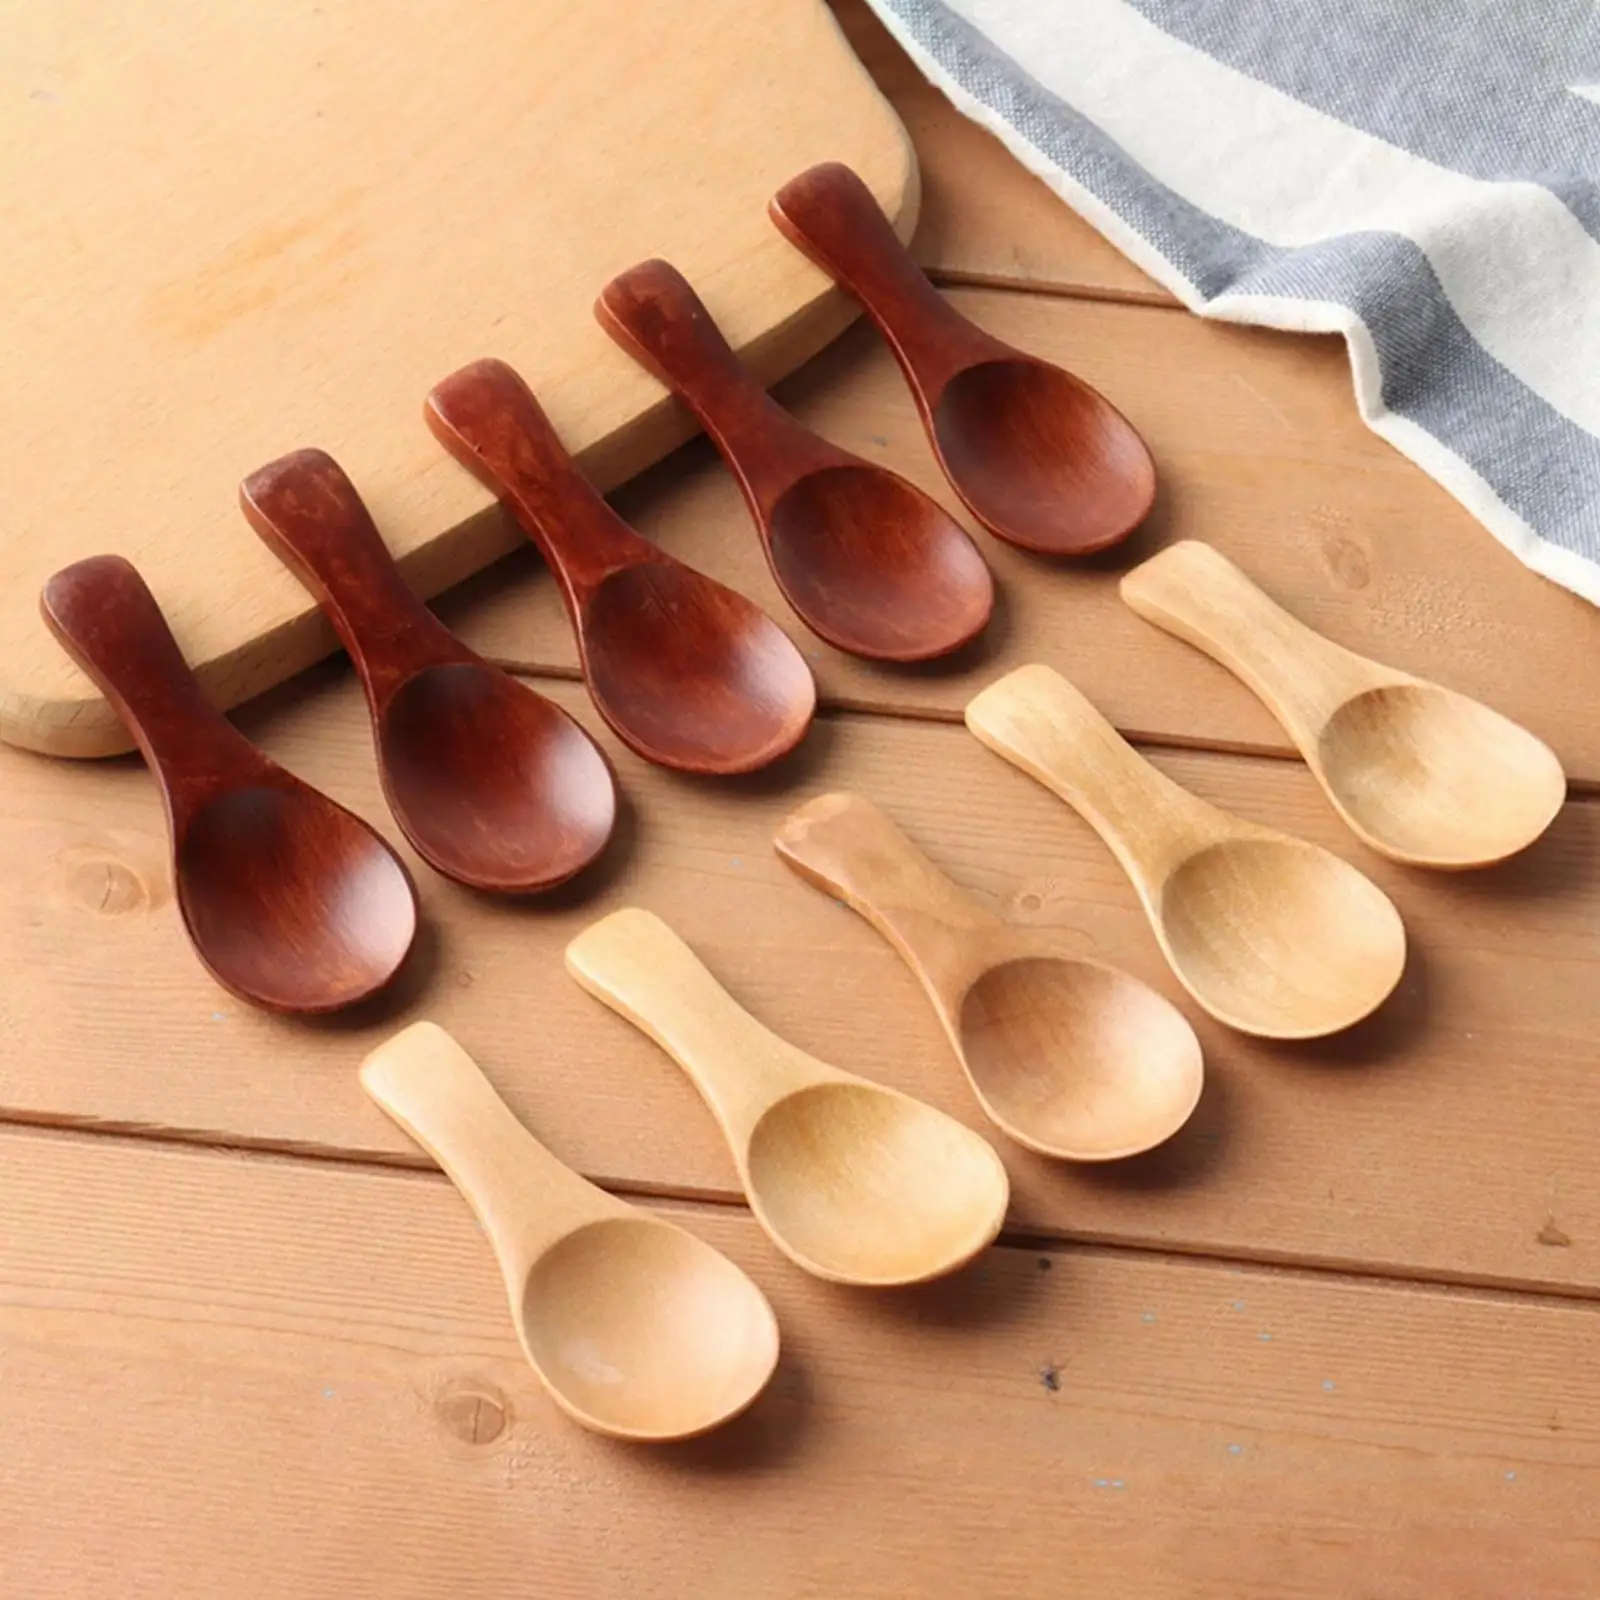 10x Small Wooden Spoons with Short Handle Tableware Cutlery Condiments Spoon for Jam Condiments Sugar Seasoning